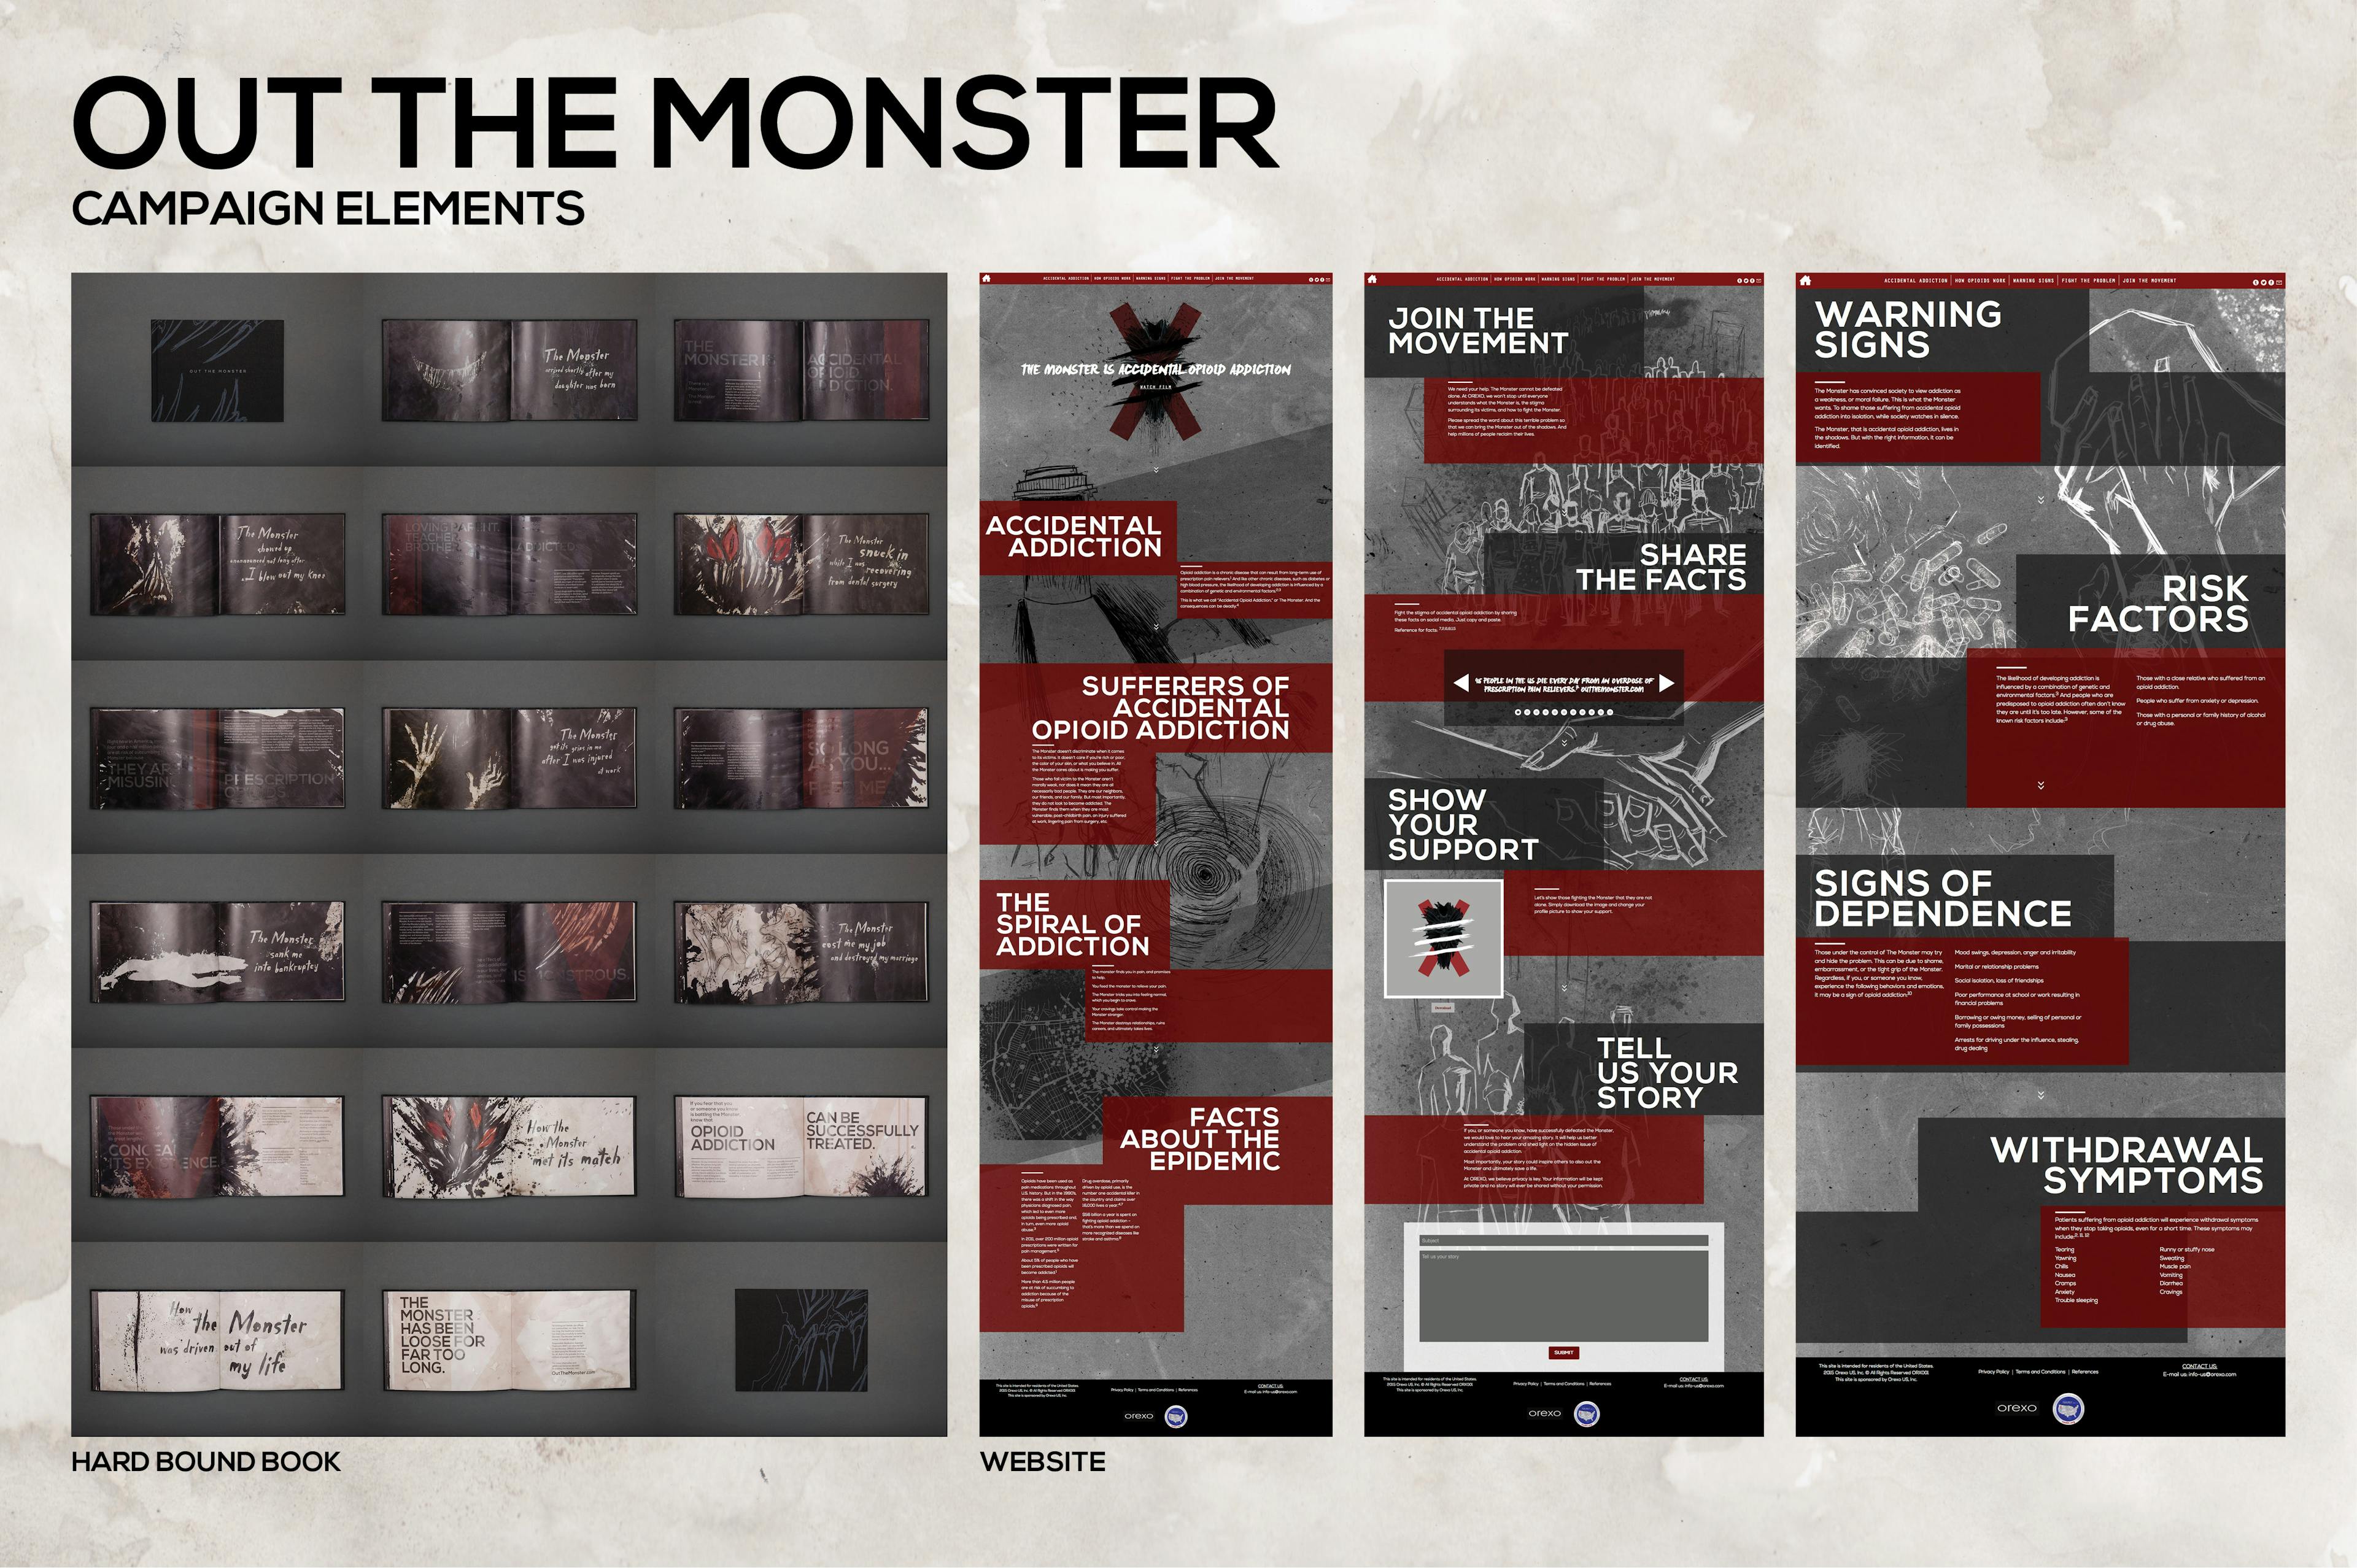 A graphic containing all “Out the Monster” campaign elements in a gray, red, and off-white color palette.